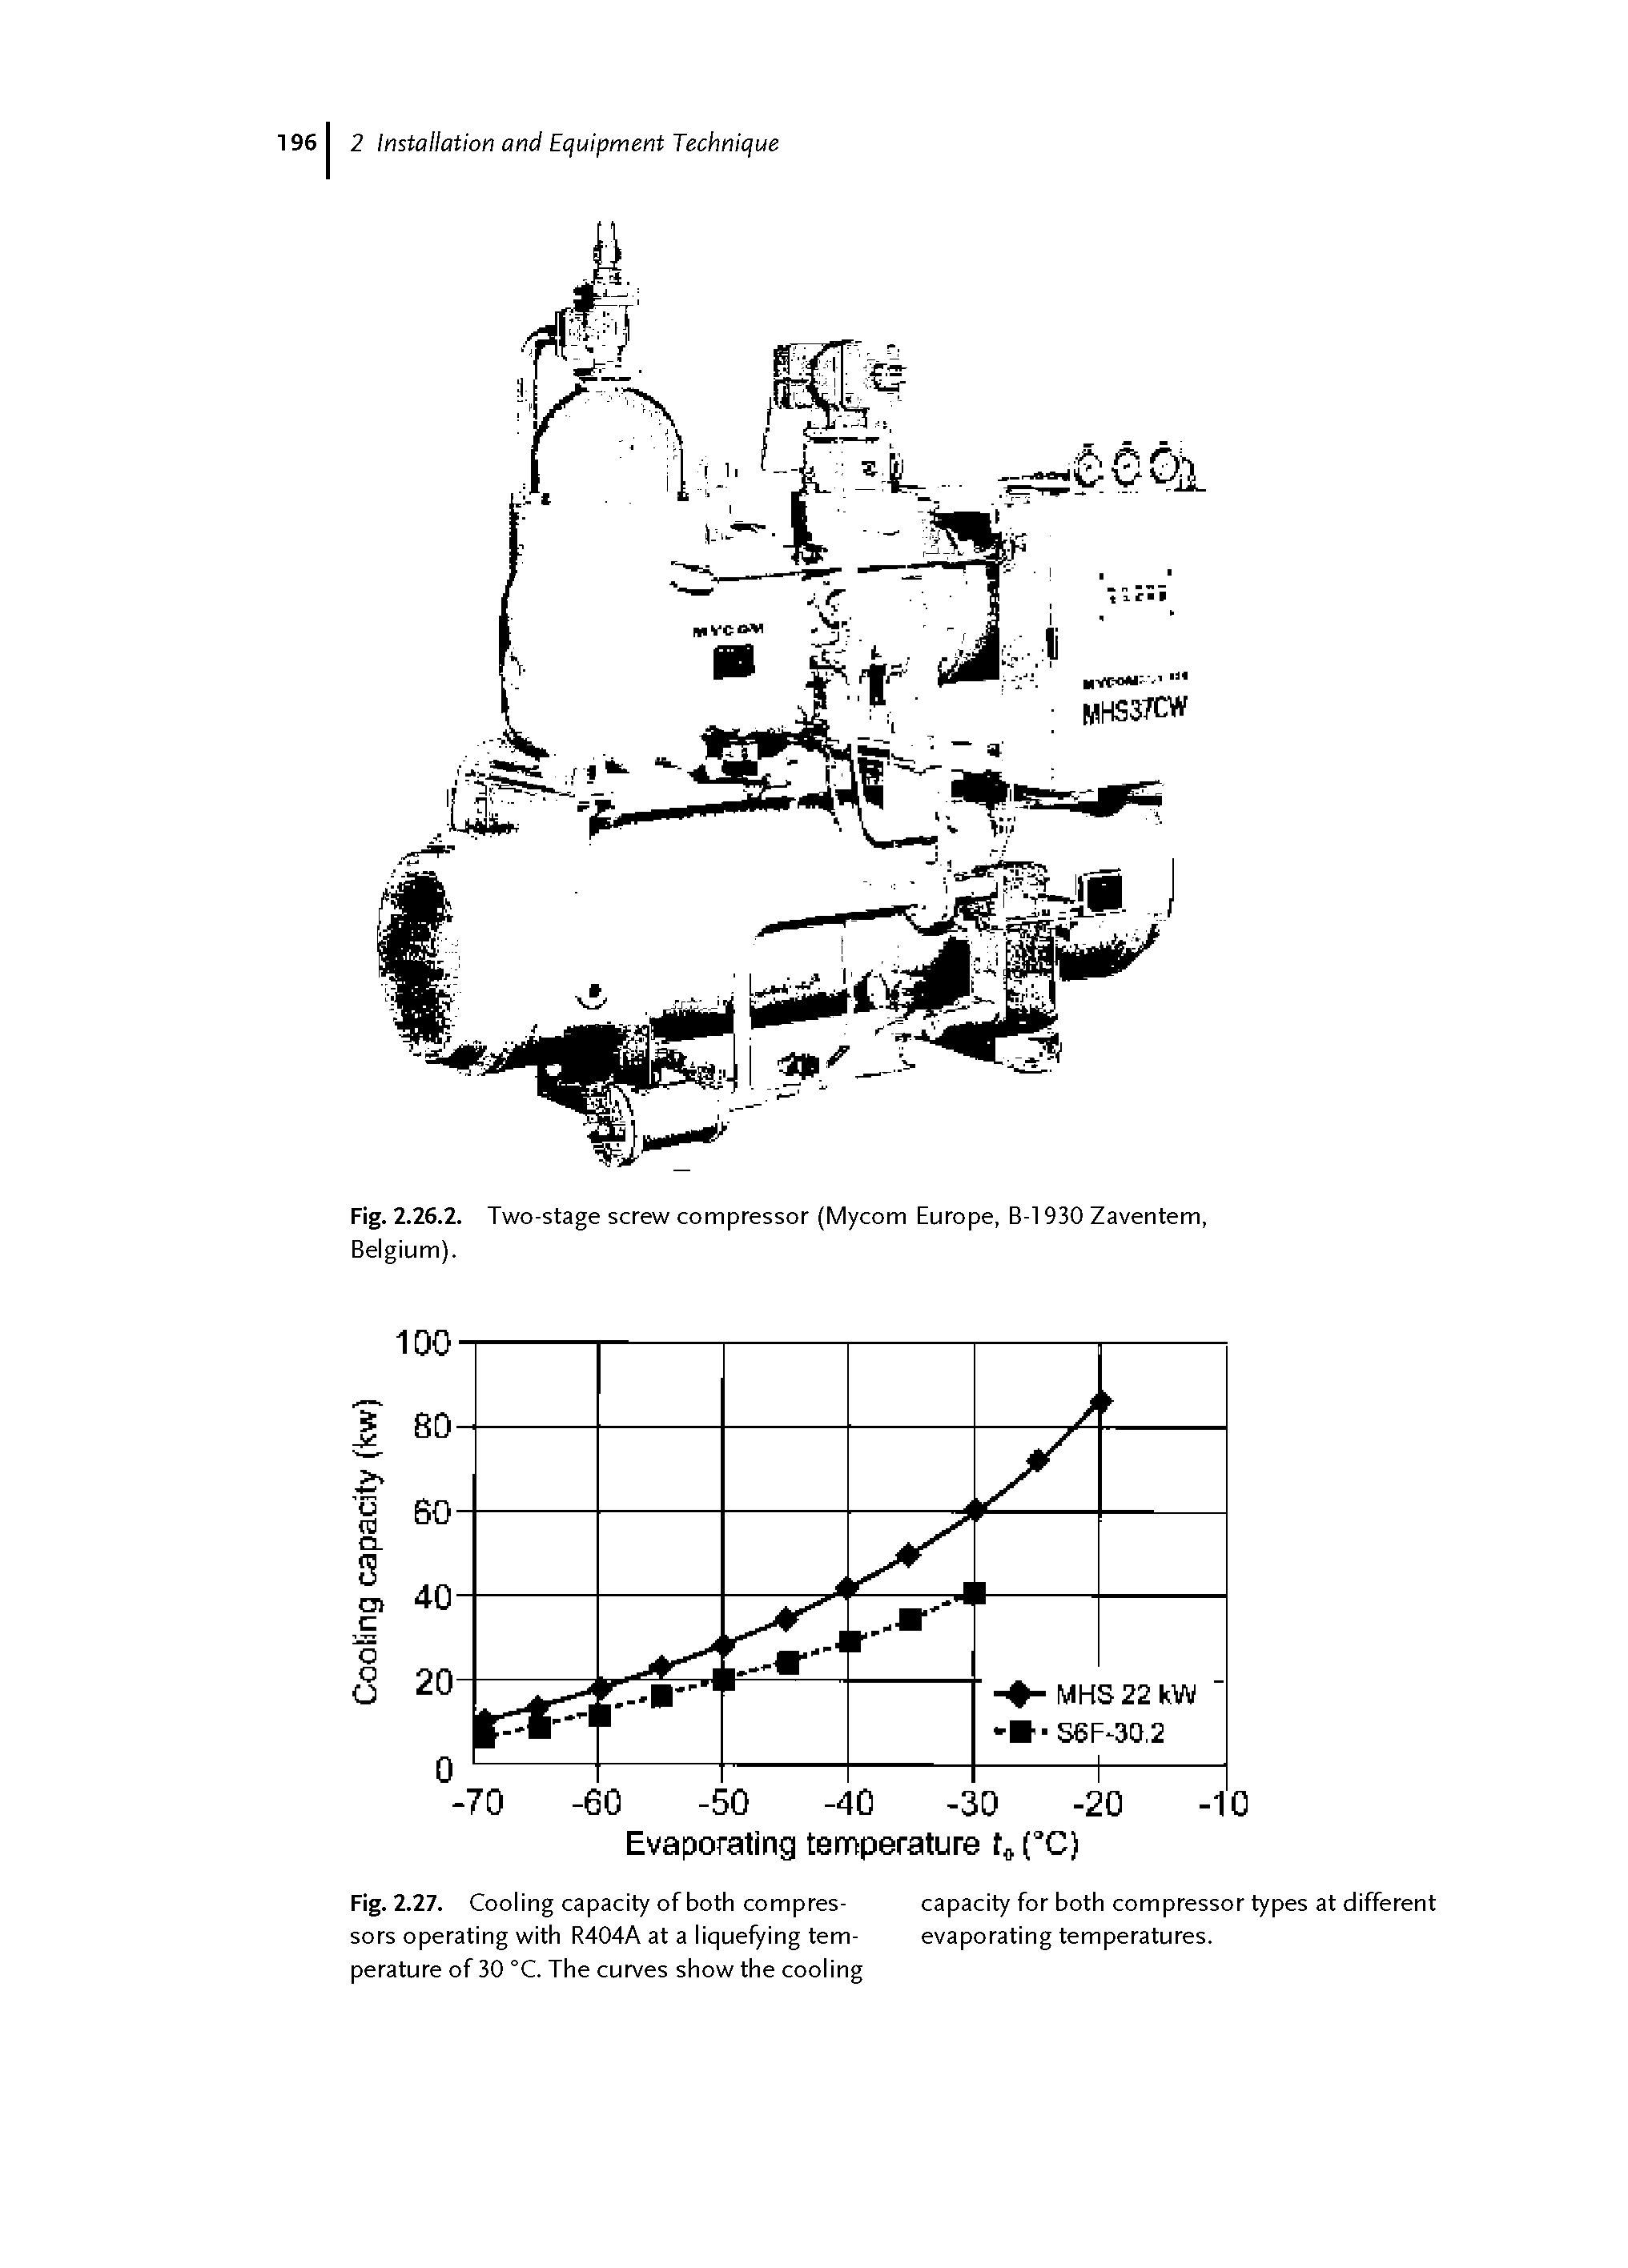 Fig. 2.27. Cooling capacity of both compres- capacity for both compressor types at different sors operating with R404A at a liquefying tern- evaporating temperatures, perature of 30 °C. The curves show the cooling...